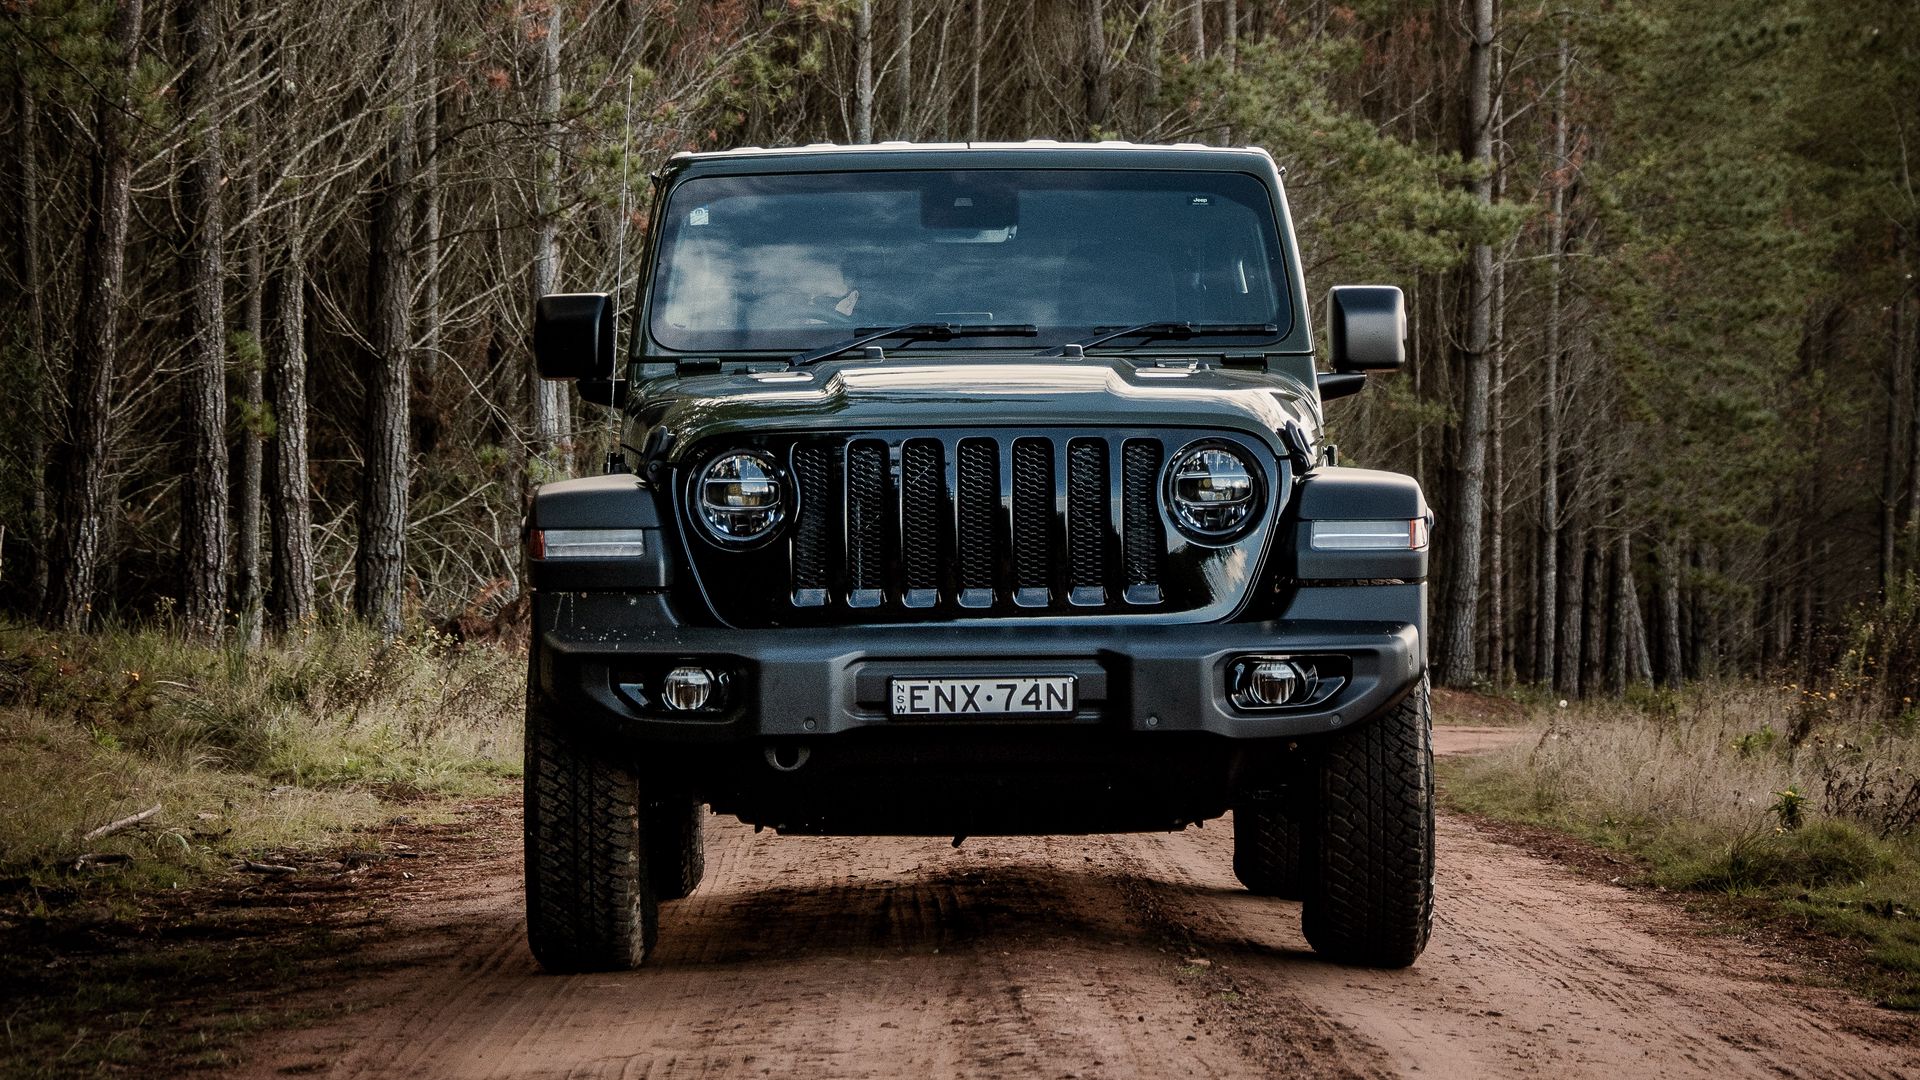 Download wallpaper 1920x1080 jeep wrangler, jeep, car, suv, black, forest  full hd, hdtv, fhd, 1080p hd background